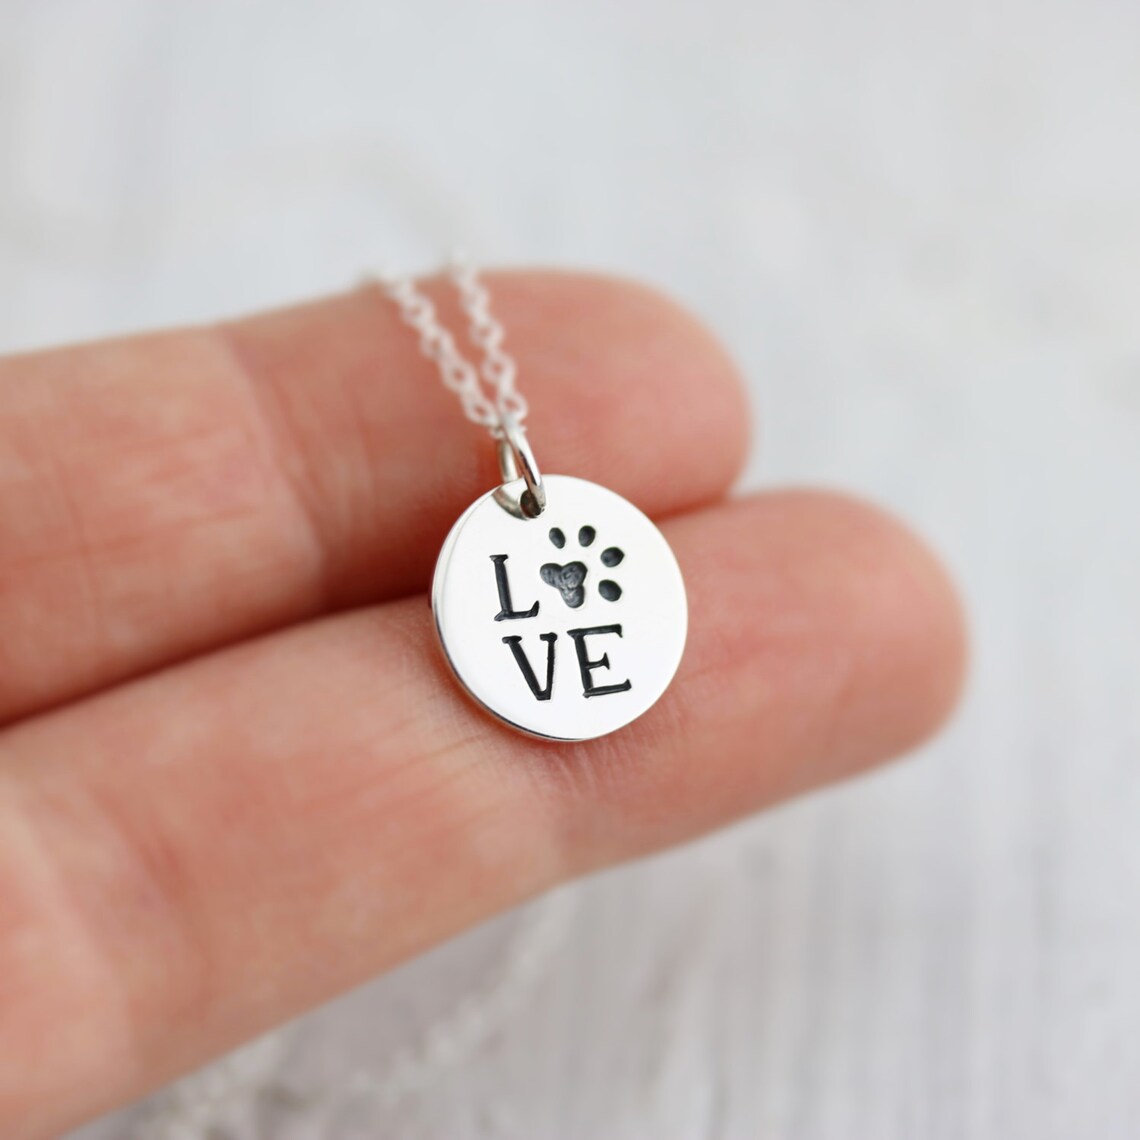 Paw Print Necklace -Sterling Silver "LOVE" with Paw Print Necklace